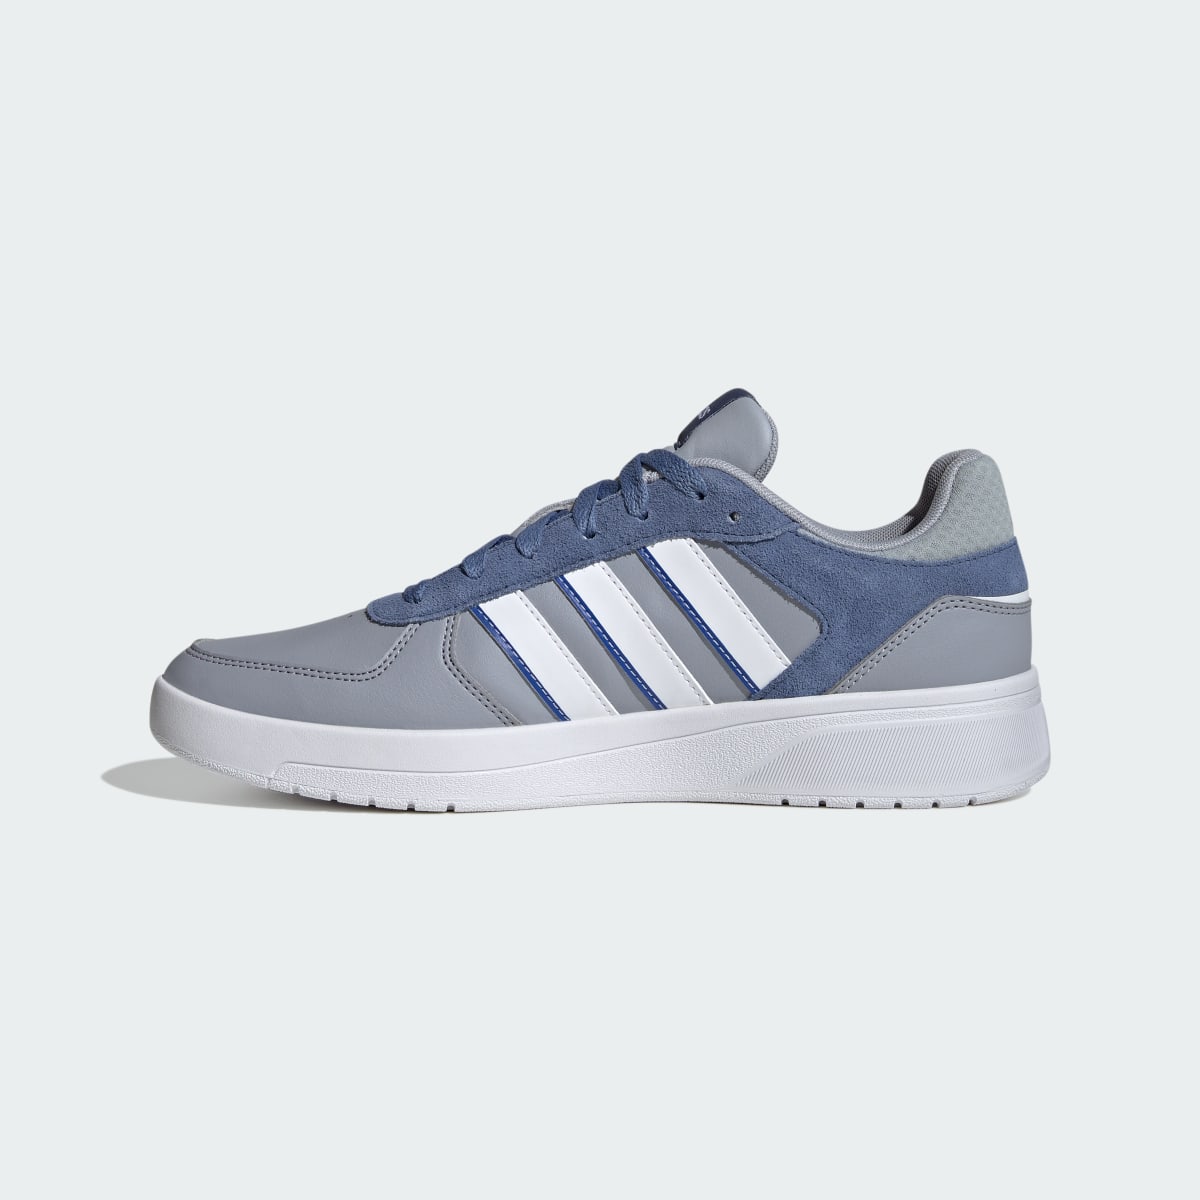 Adidas Courtbeat Shoes. 7